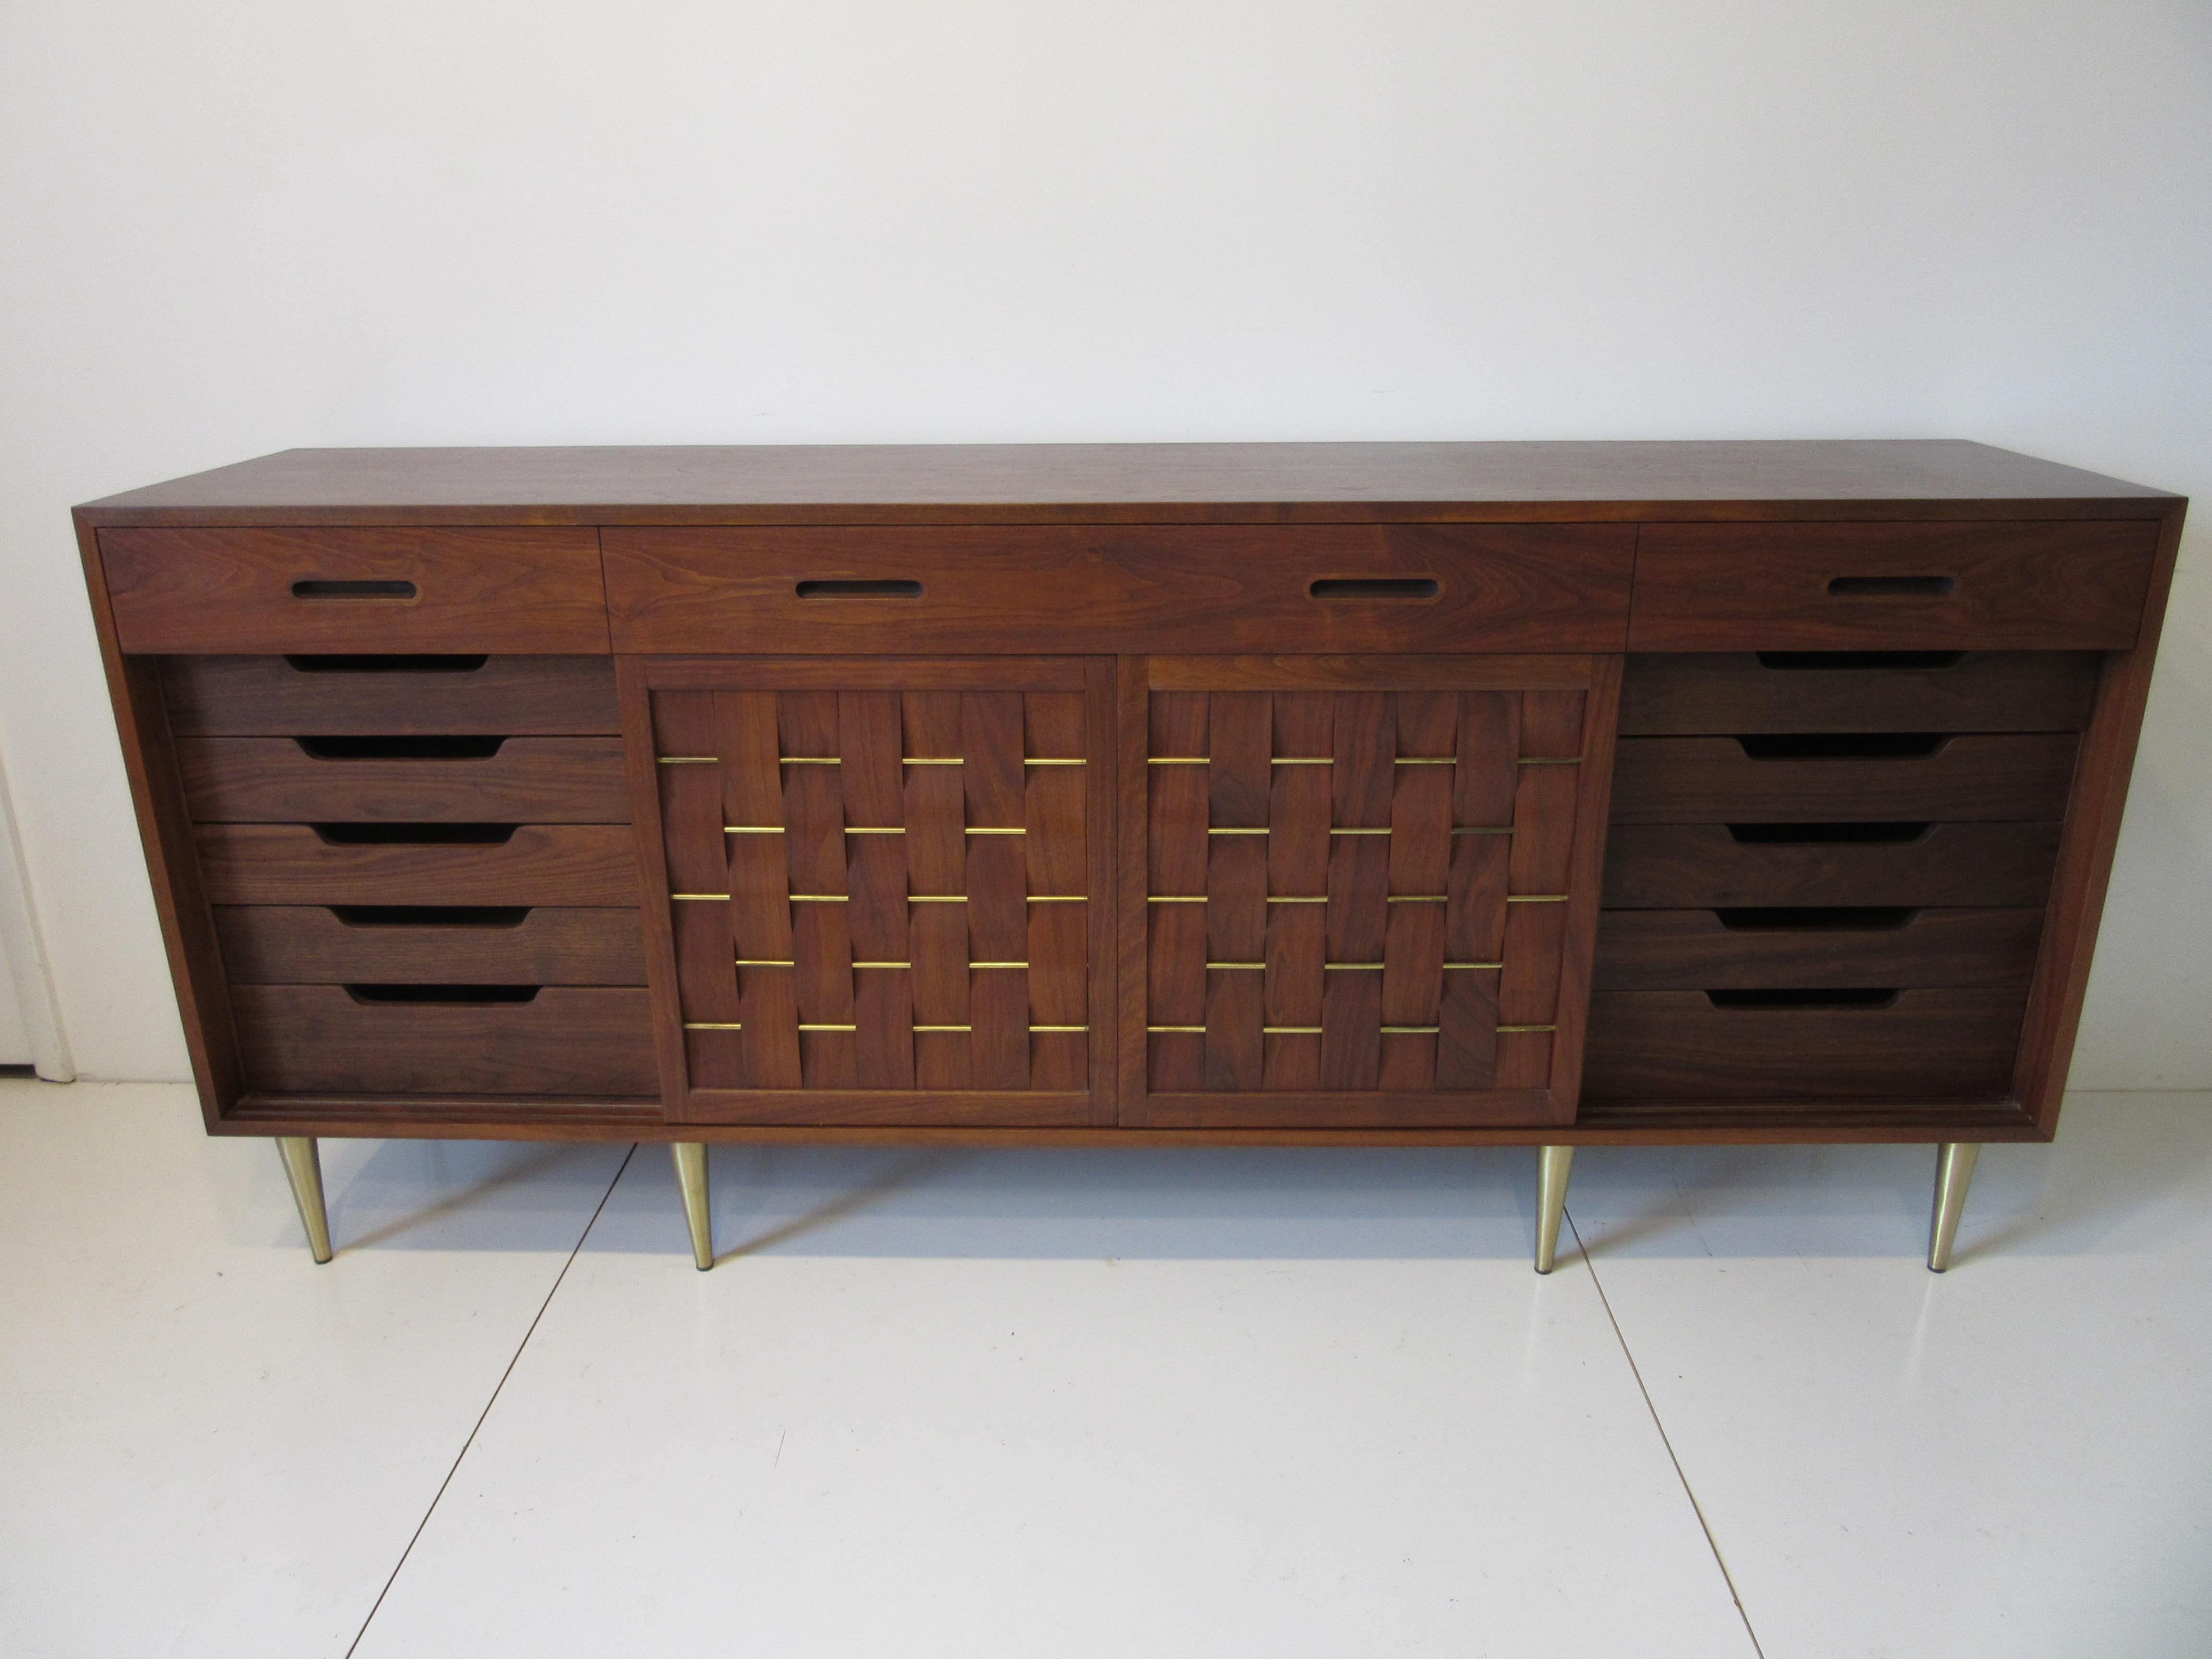 A beautiful medium toned walnut credenza sideboard with four sliding doors having interwoven strips of walnut with brass details. The three top drawers have built in pulls and behind the sliding doors each end has additional drawers with removeable